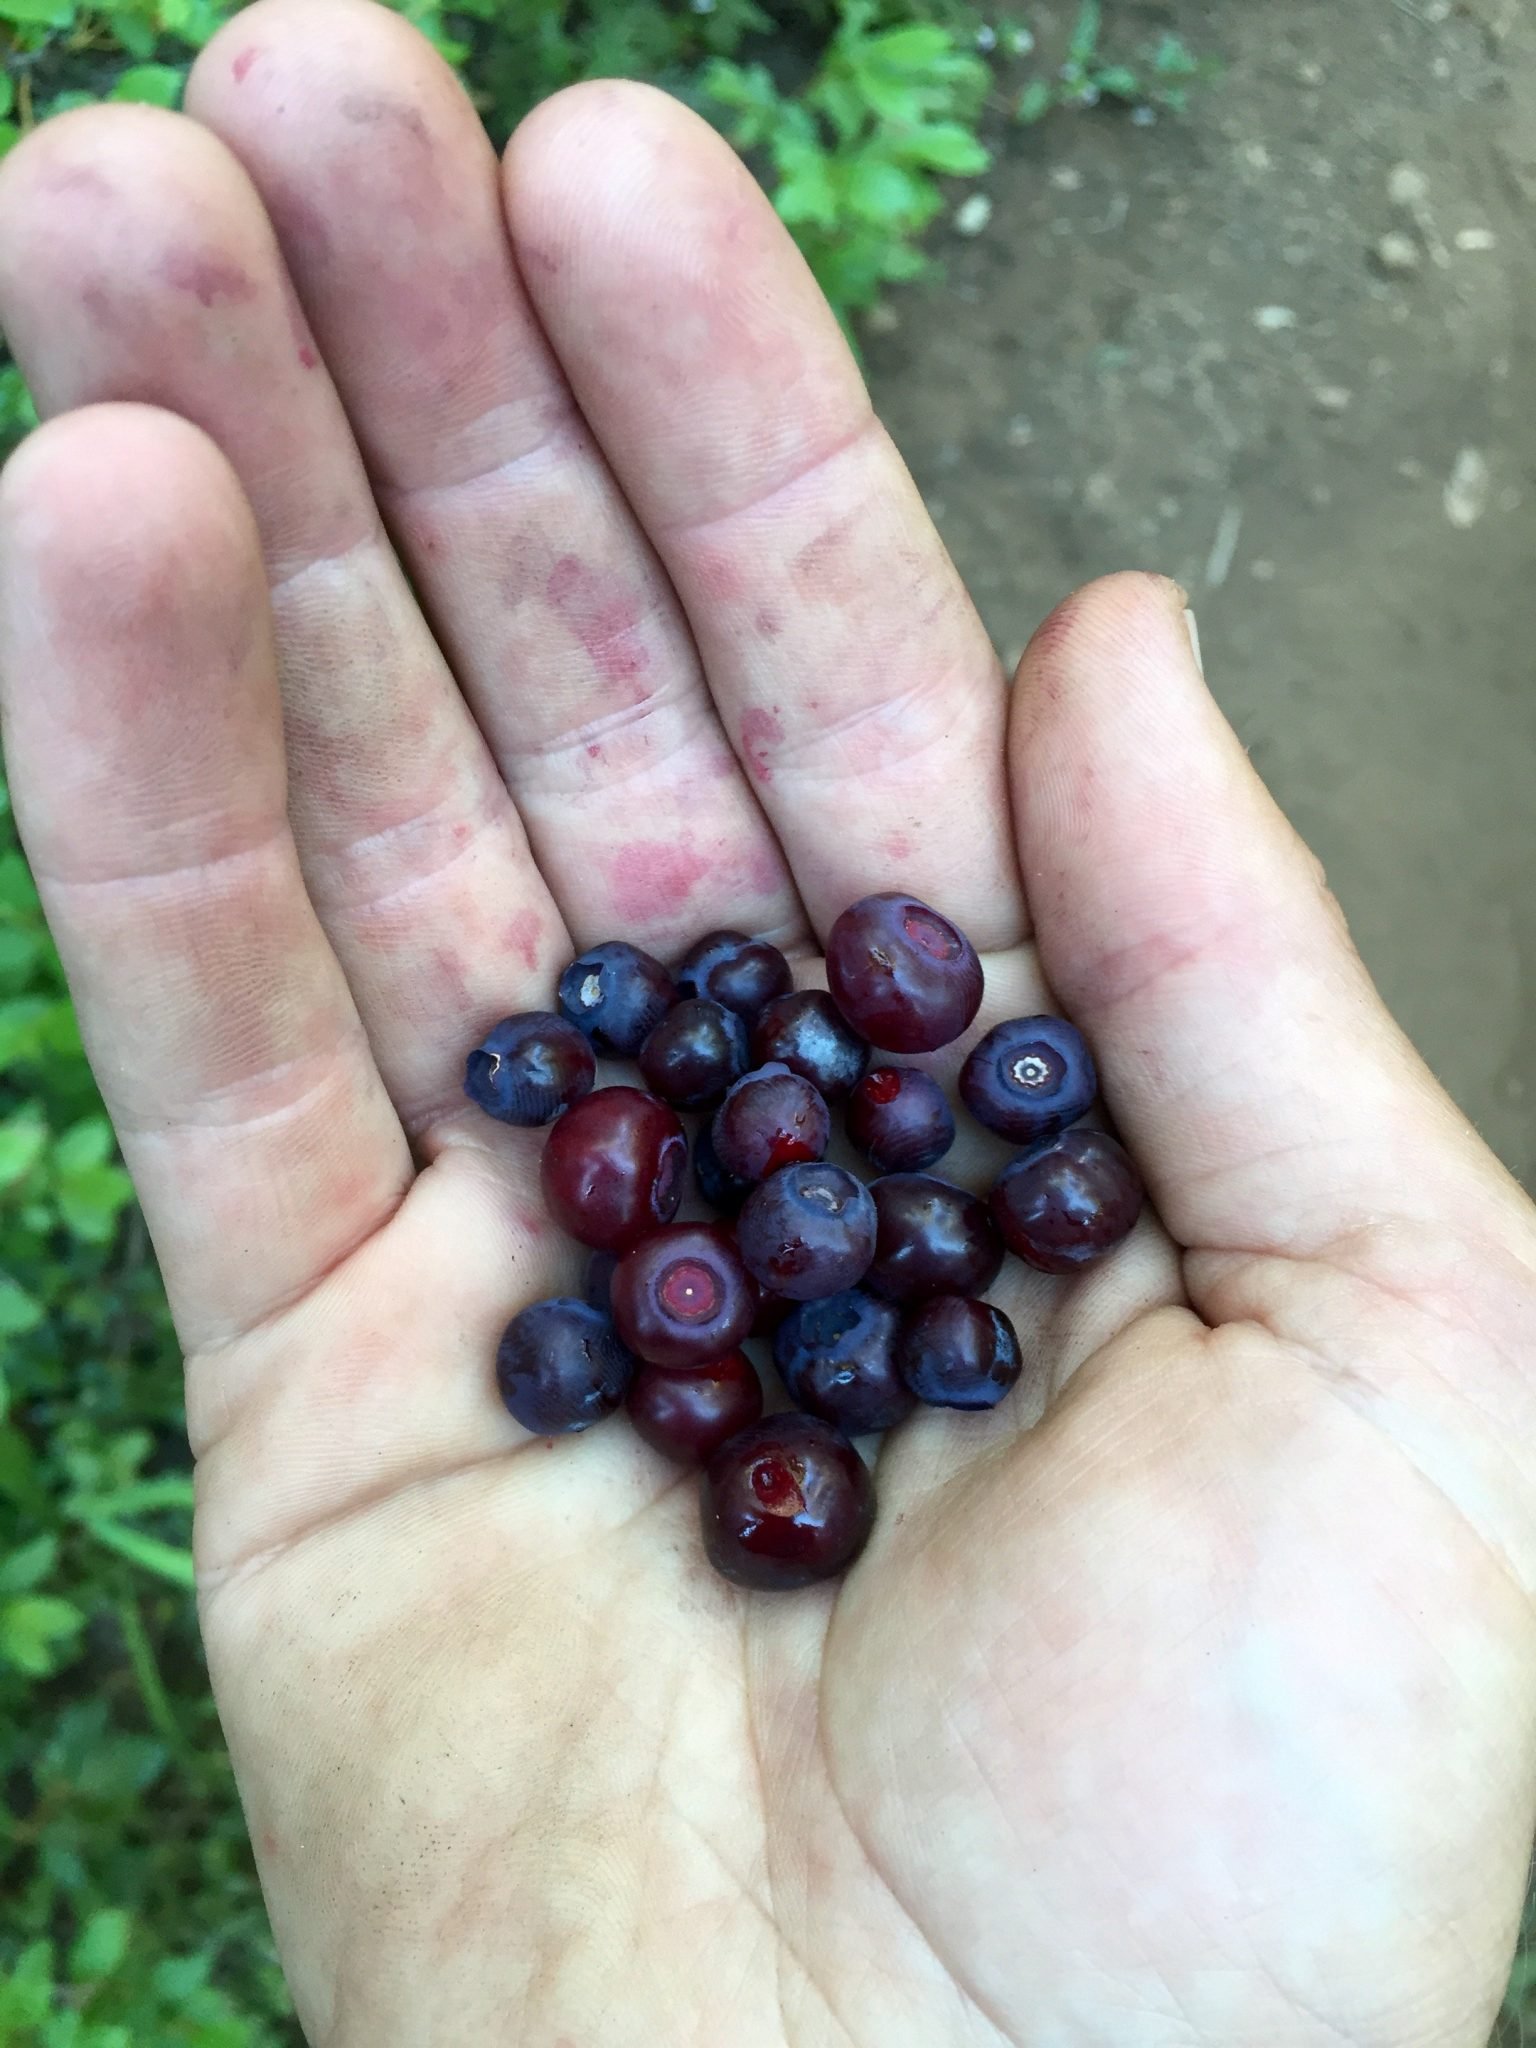 Handful of blueberries picked from alongside the PCT